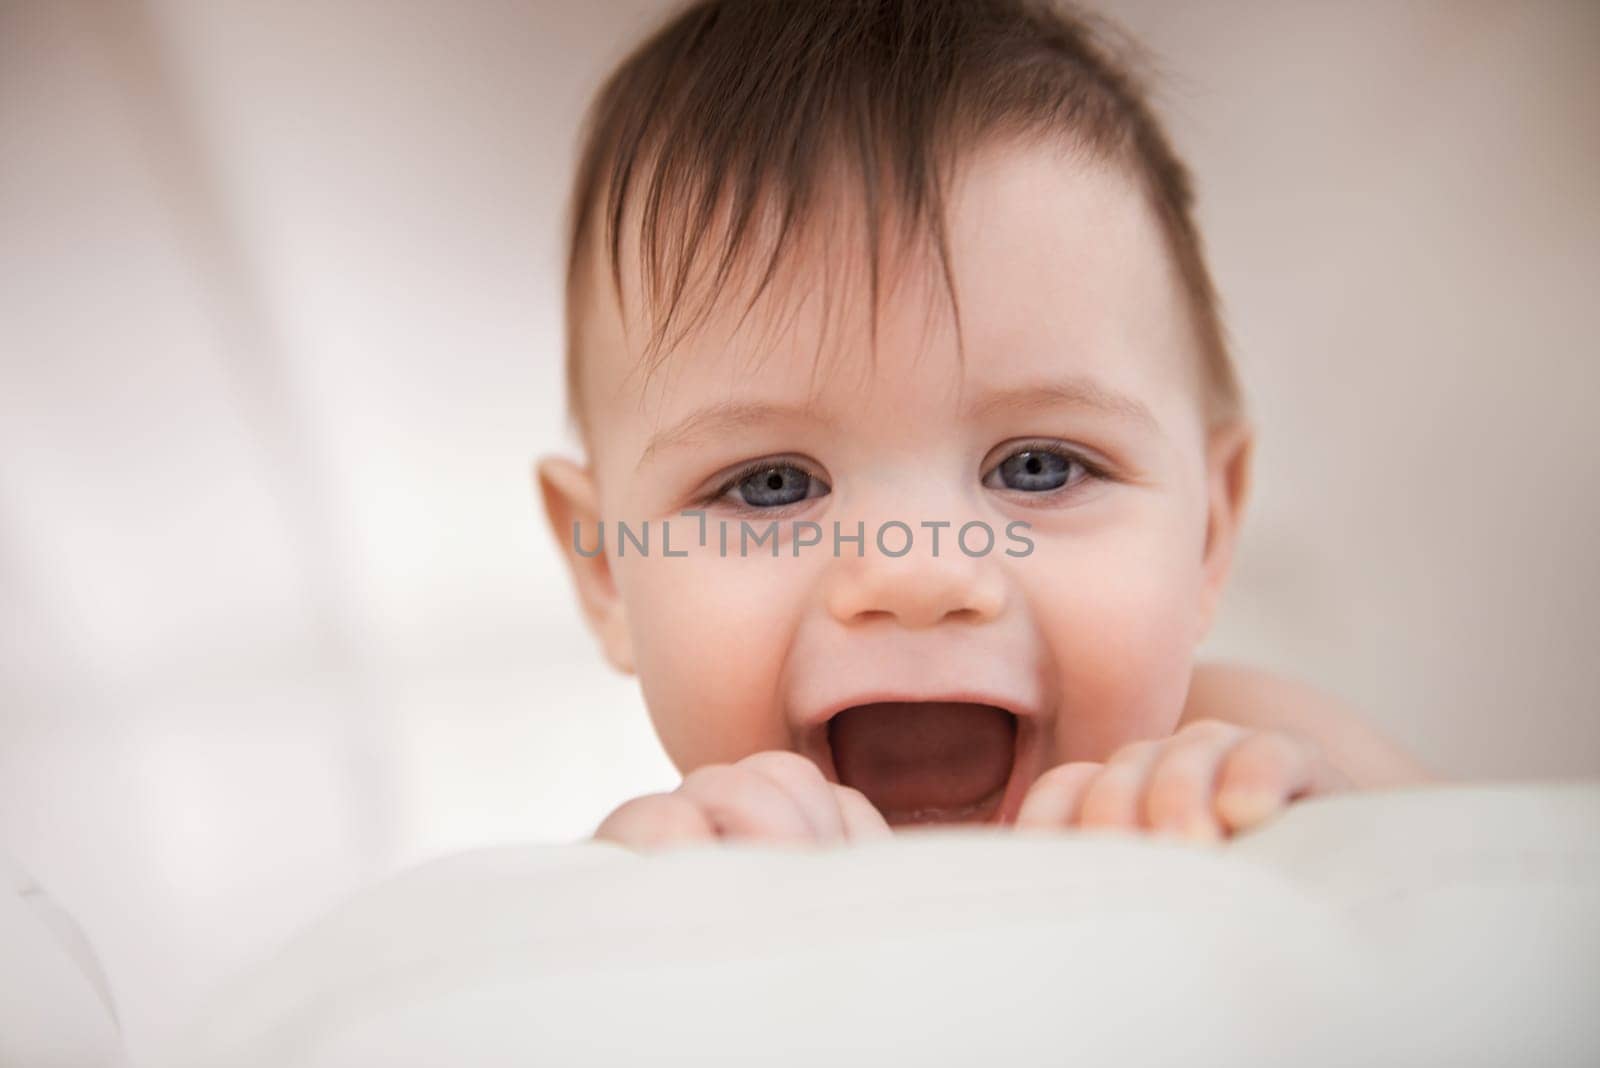 Baby boy, excited smile and happy for play, growth and development for childhood. Adorable infant, young and healthy kid at home with face expression, learning motor skills and comfortable in house.